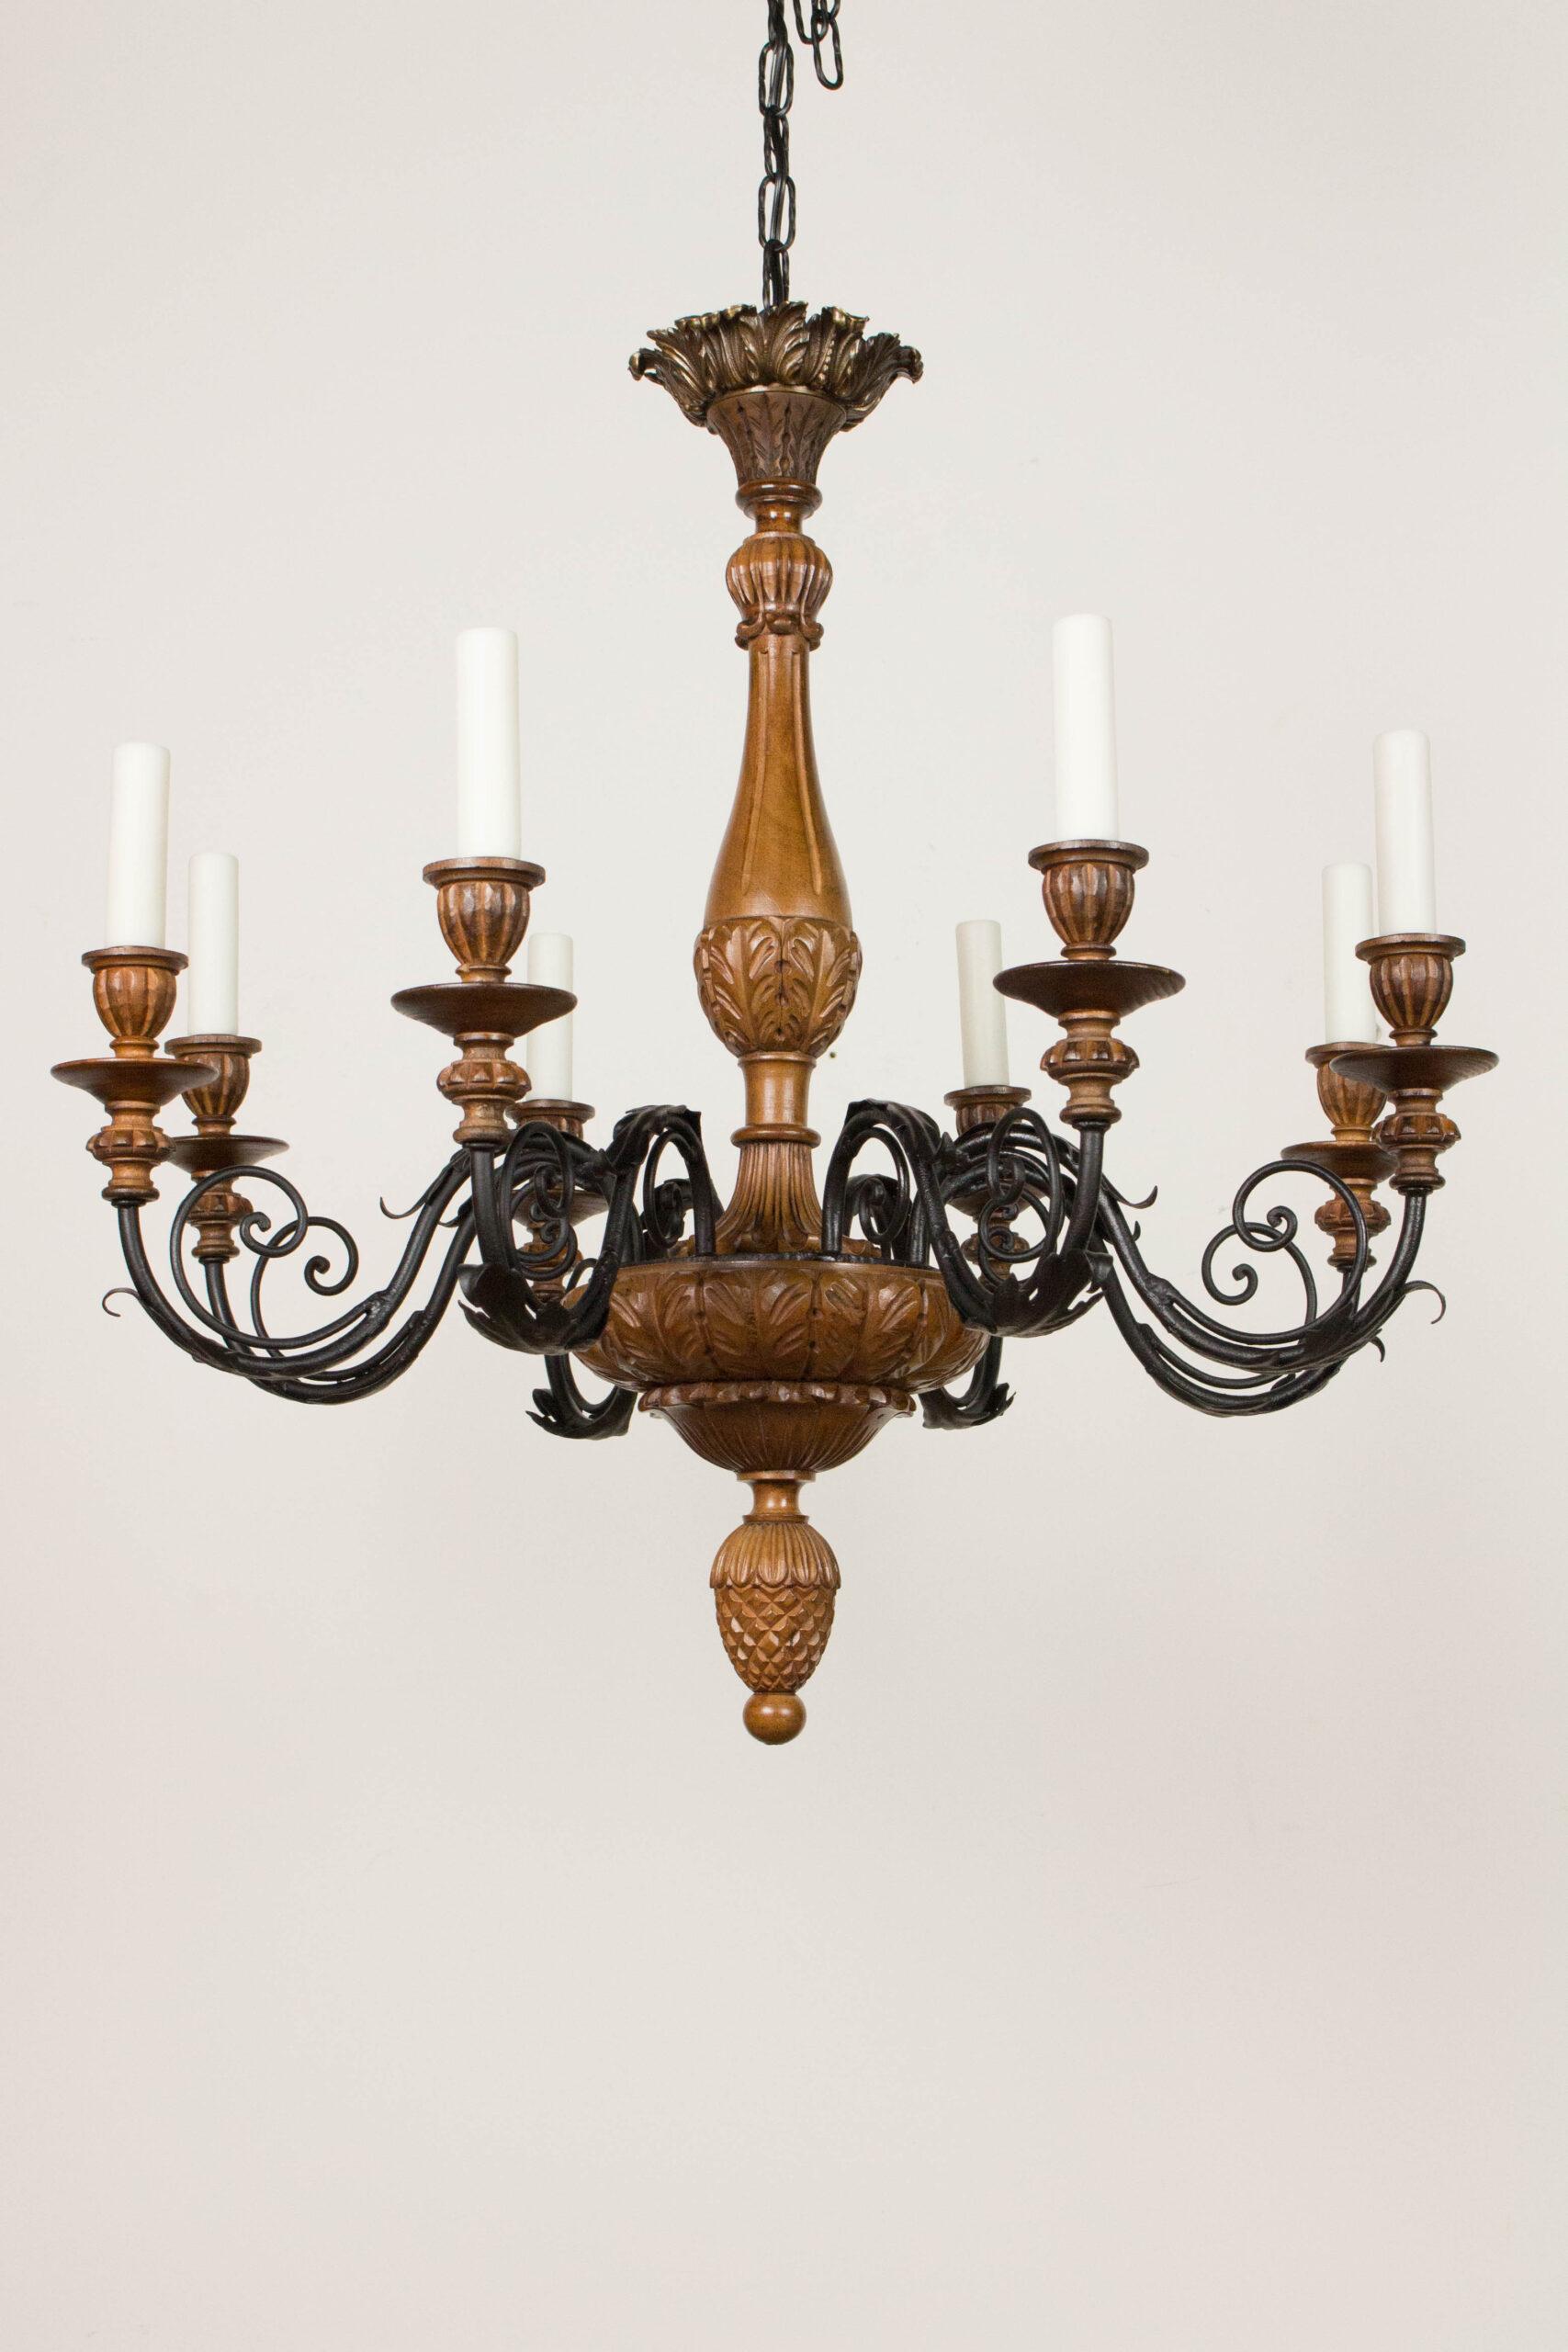 C384 Early 20th Century Italian Carved Wood and Metal Chandelier For Sale 3